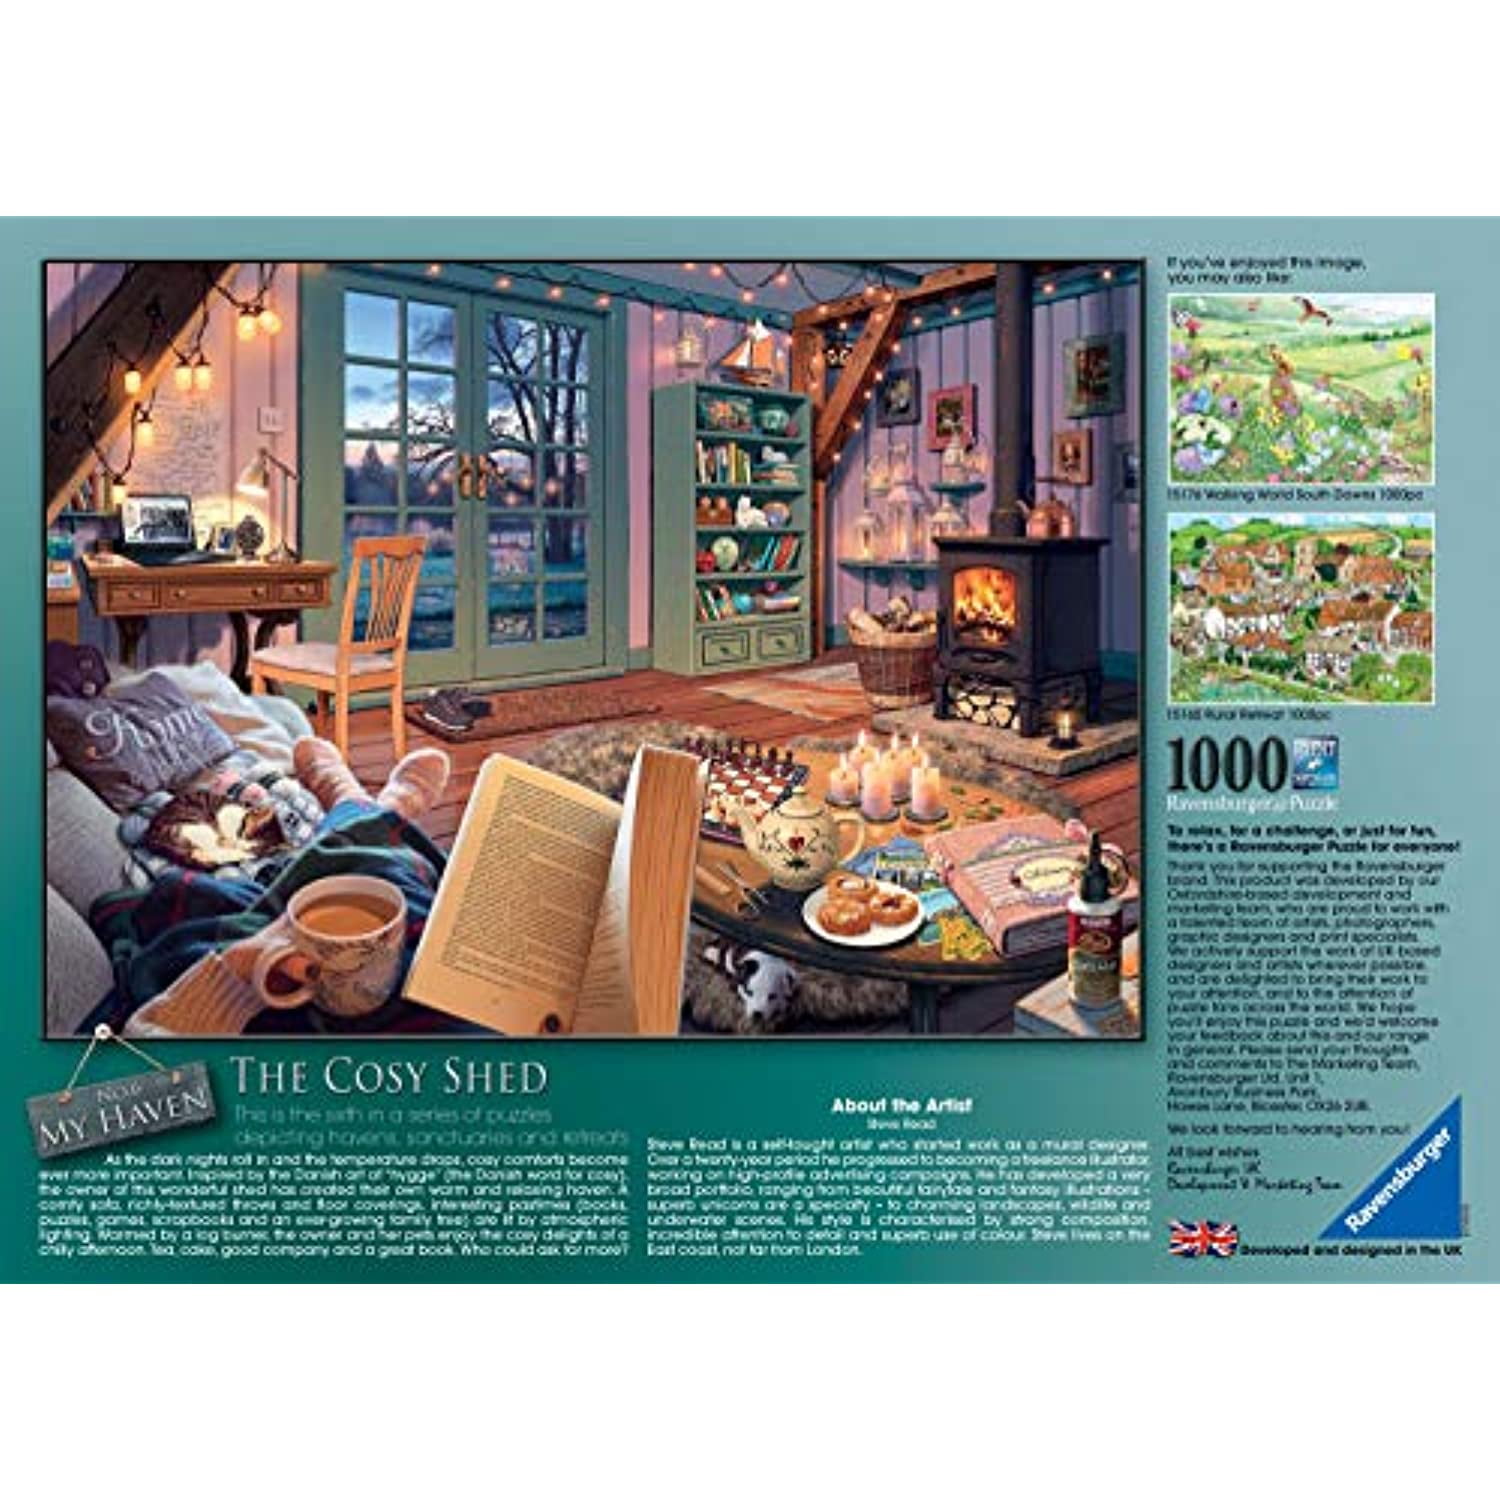 1000 Piece Collectible Ravensburger Jigsaw Puzzle  THE COSY SHED 